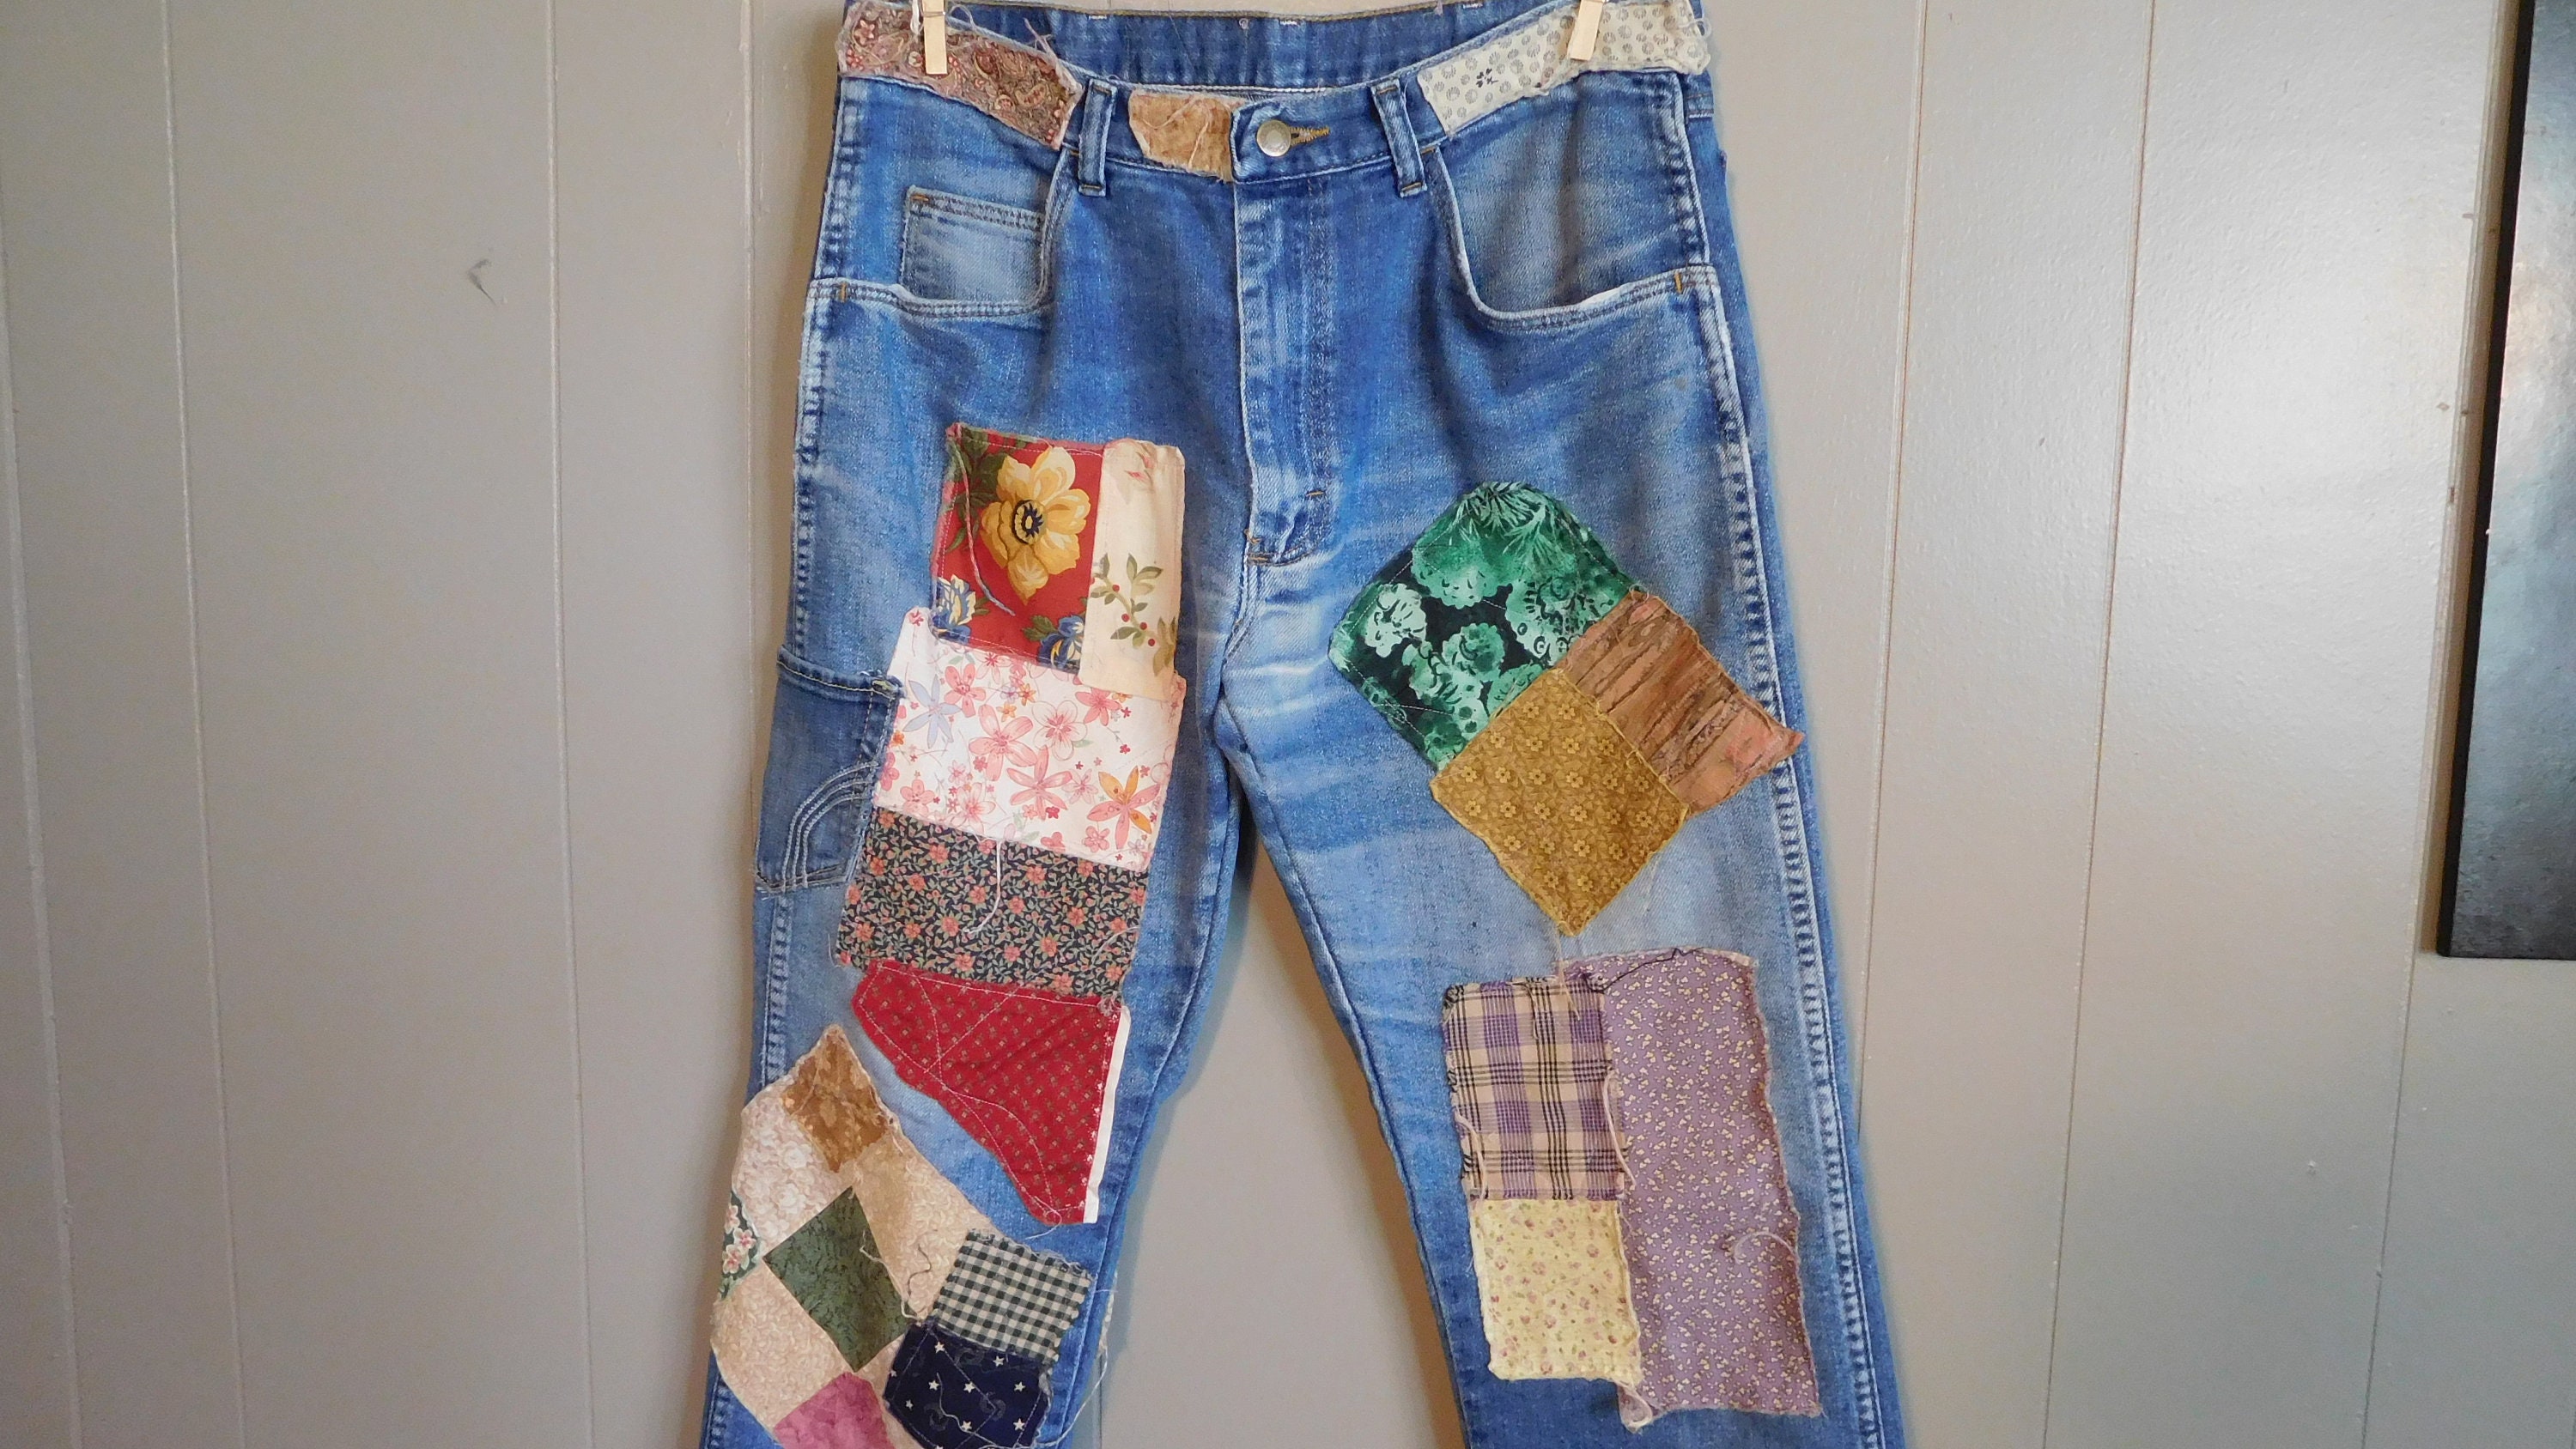 LandofBridget Patchwork Jeans Mens Patched Denim with Patches Boho Hippie Patch Distressed 33x30 Patched Front Back Grunge Hippie Boho Bohemian Handmade